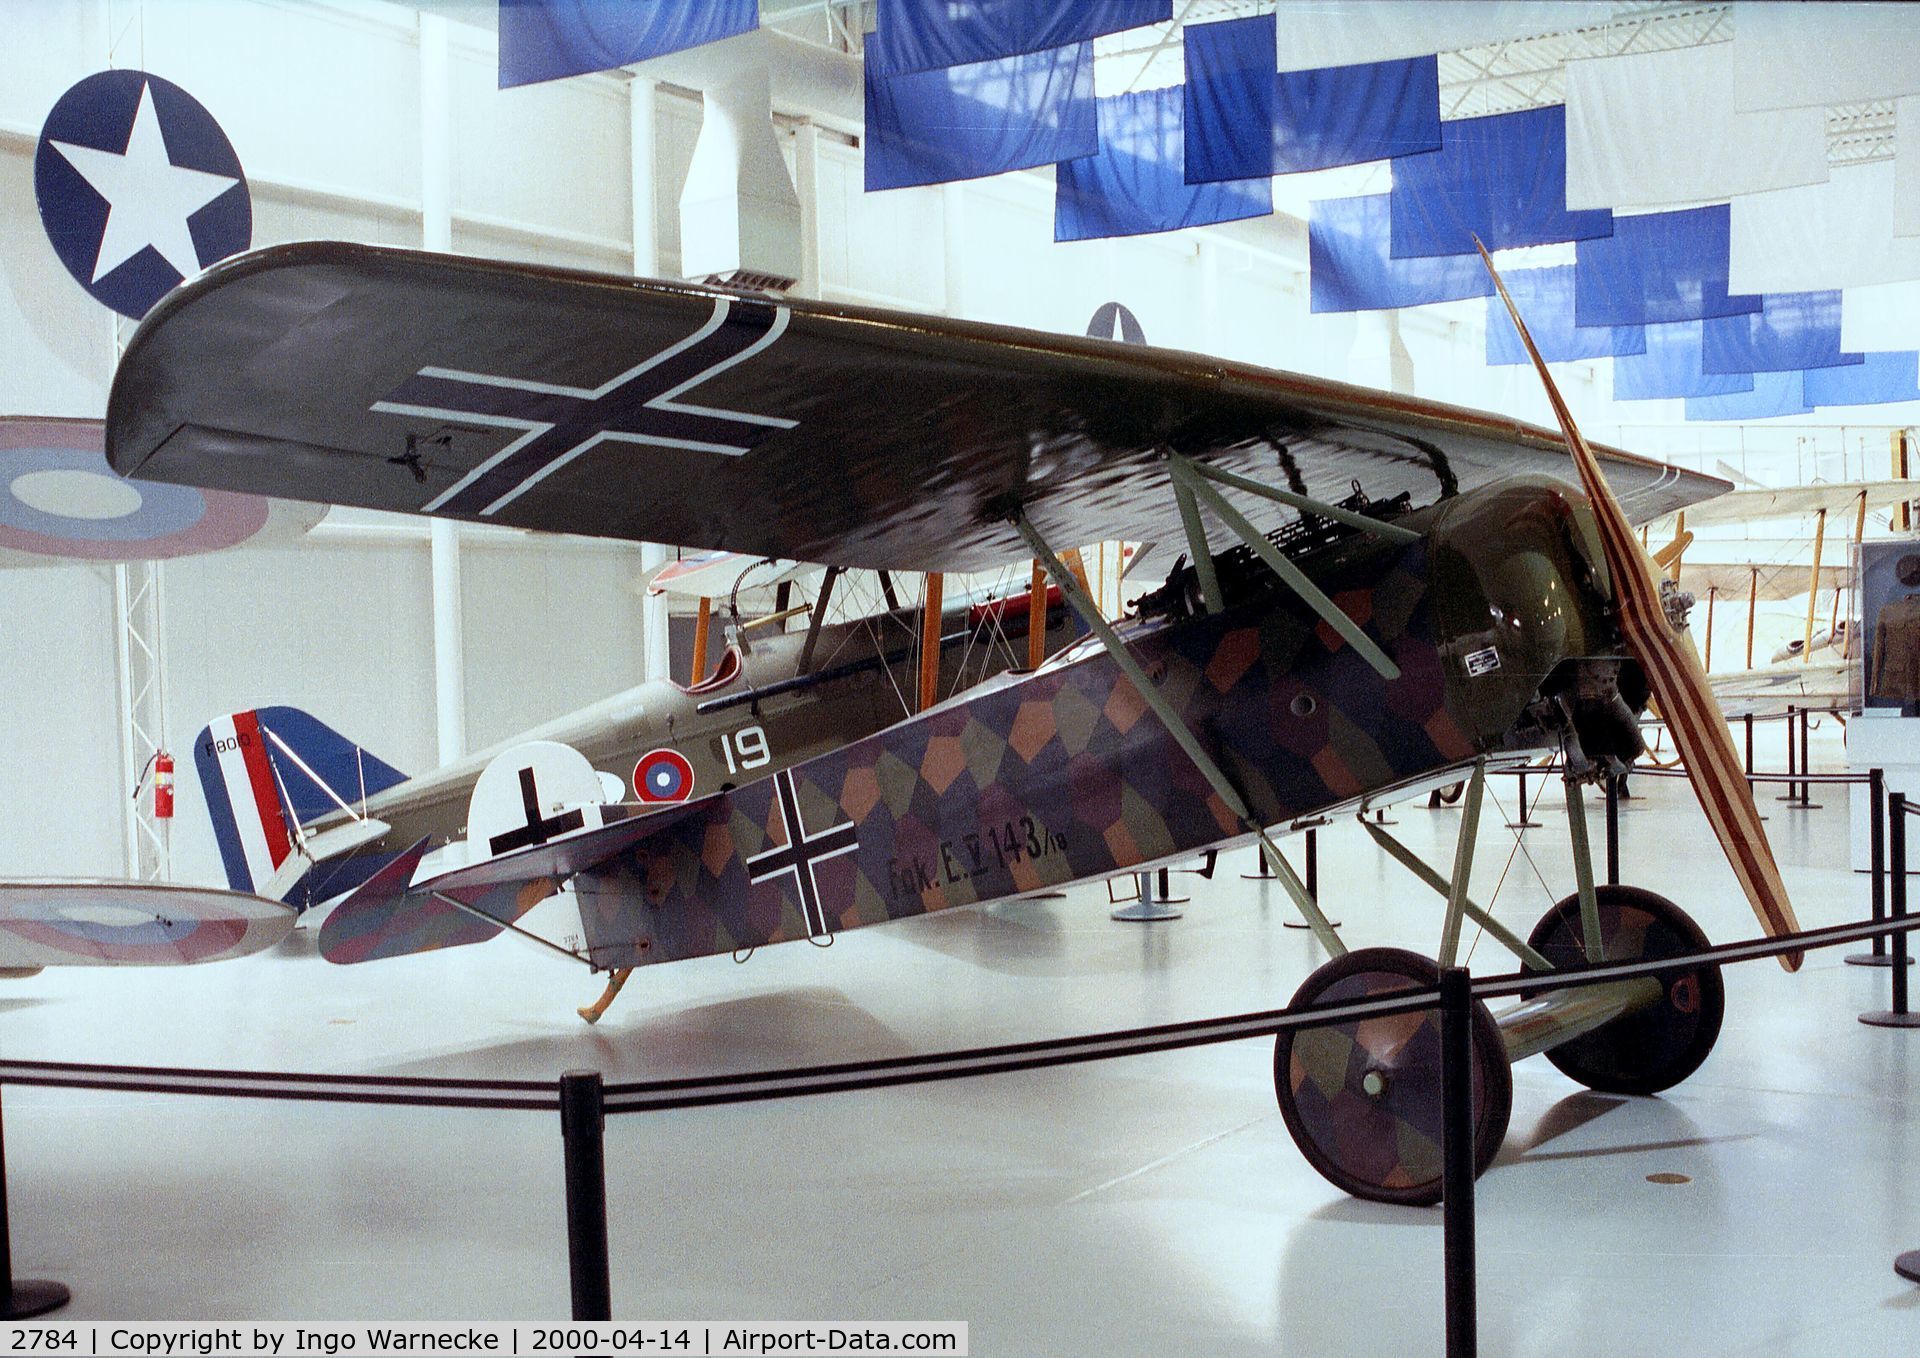 2784, Fokker D.8/E.5 C/N Not found 2784, Fokker D VIII (E V) displayed as 143/18 of the Imperial German army air force at the Army Aviation Museum, Ft Rucker AL